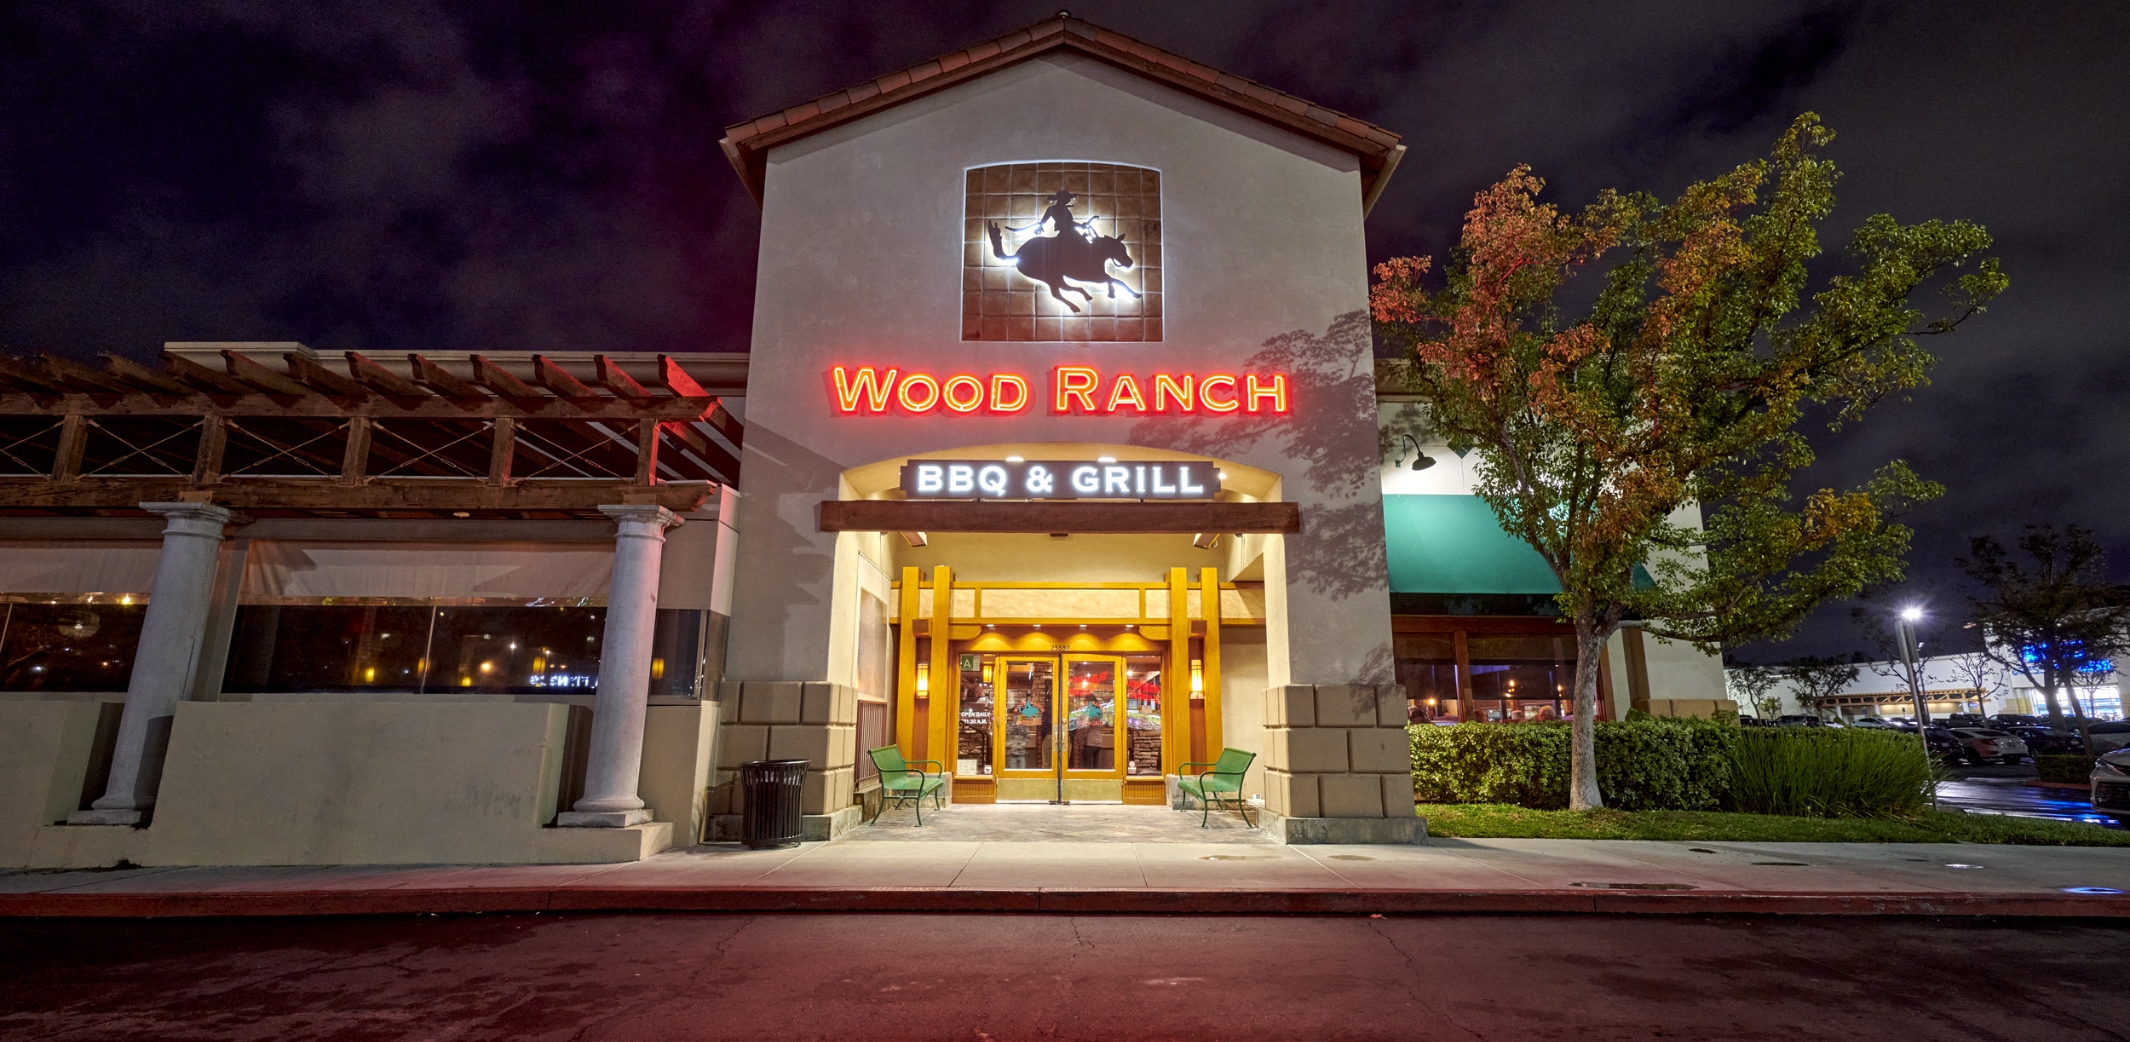 The illuminated facade of Wood Ranch BBQ & Grill in Valencia at night, showcasing its striking sign and welcoming entrance framed by mature trees and soft exterior lighting.